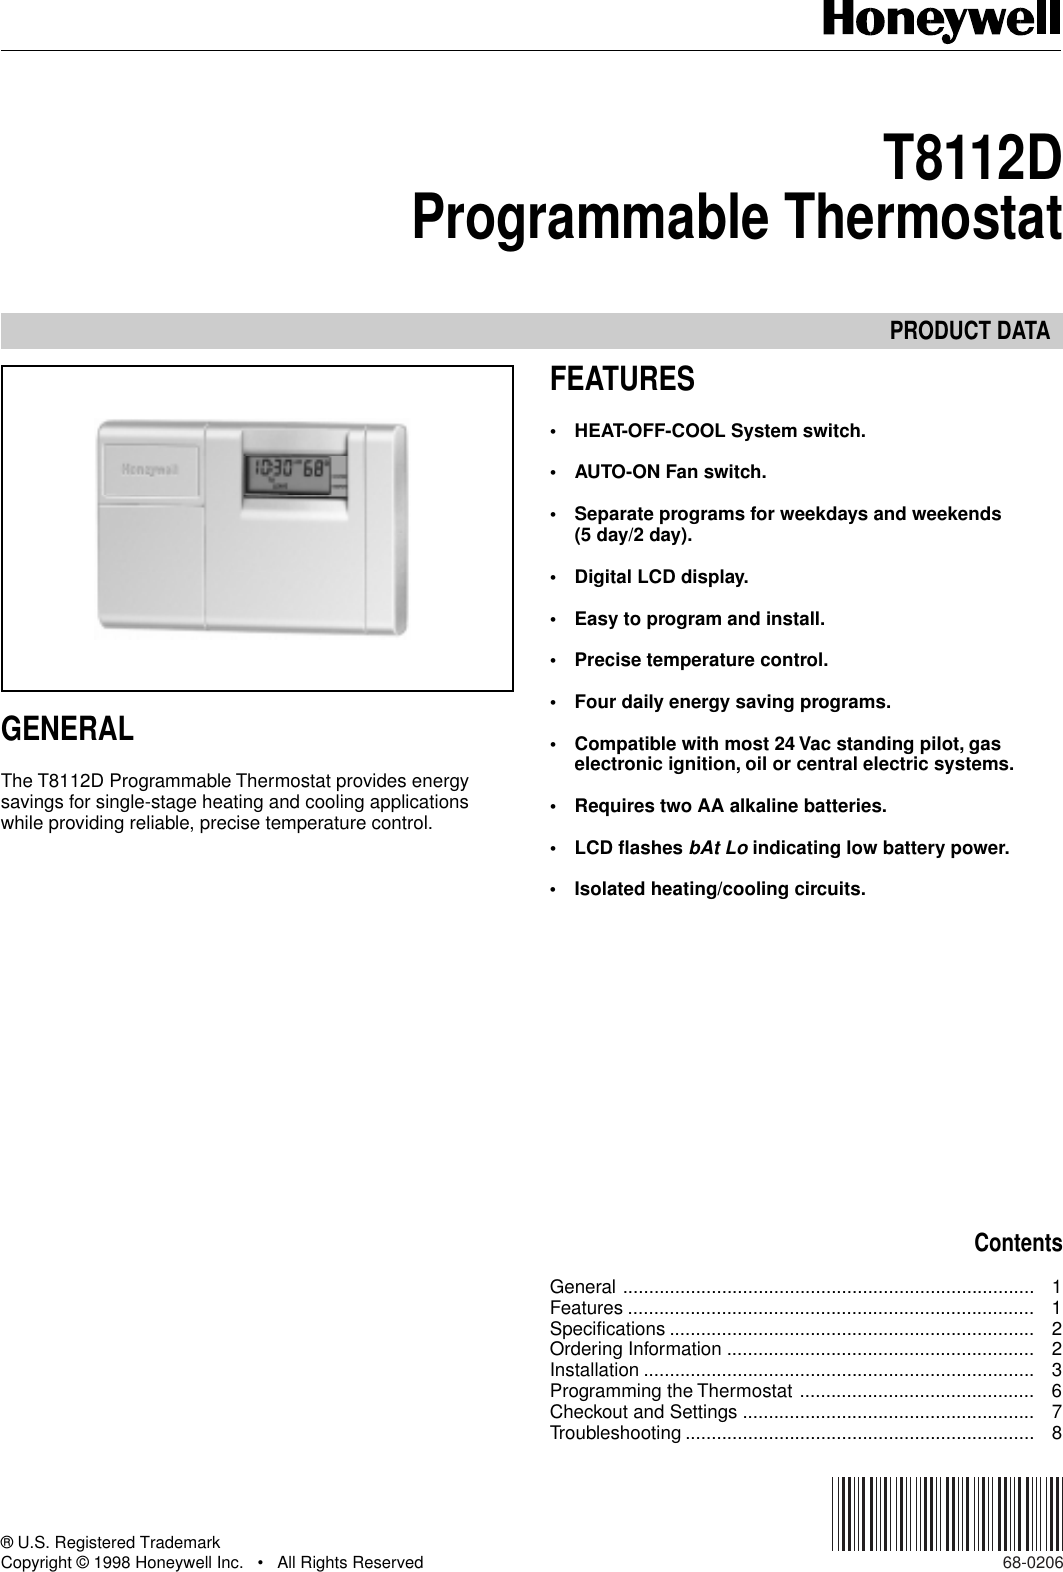 Page 1 of 8 - Honeywell Honeywell-T8112D-Owners-Manual- 68-0170 - T8112 Programmable Thermostat  Honeywell-t8112d-owners-manual